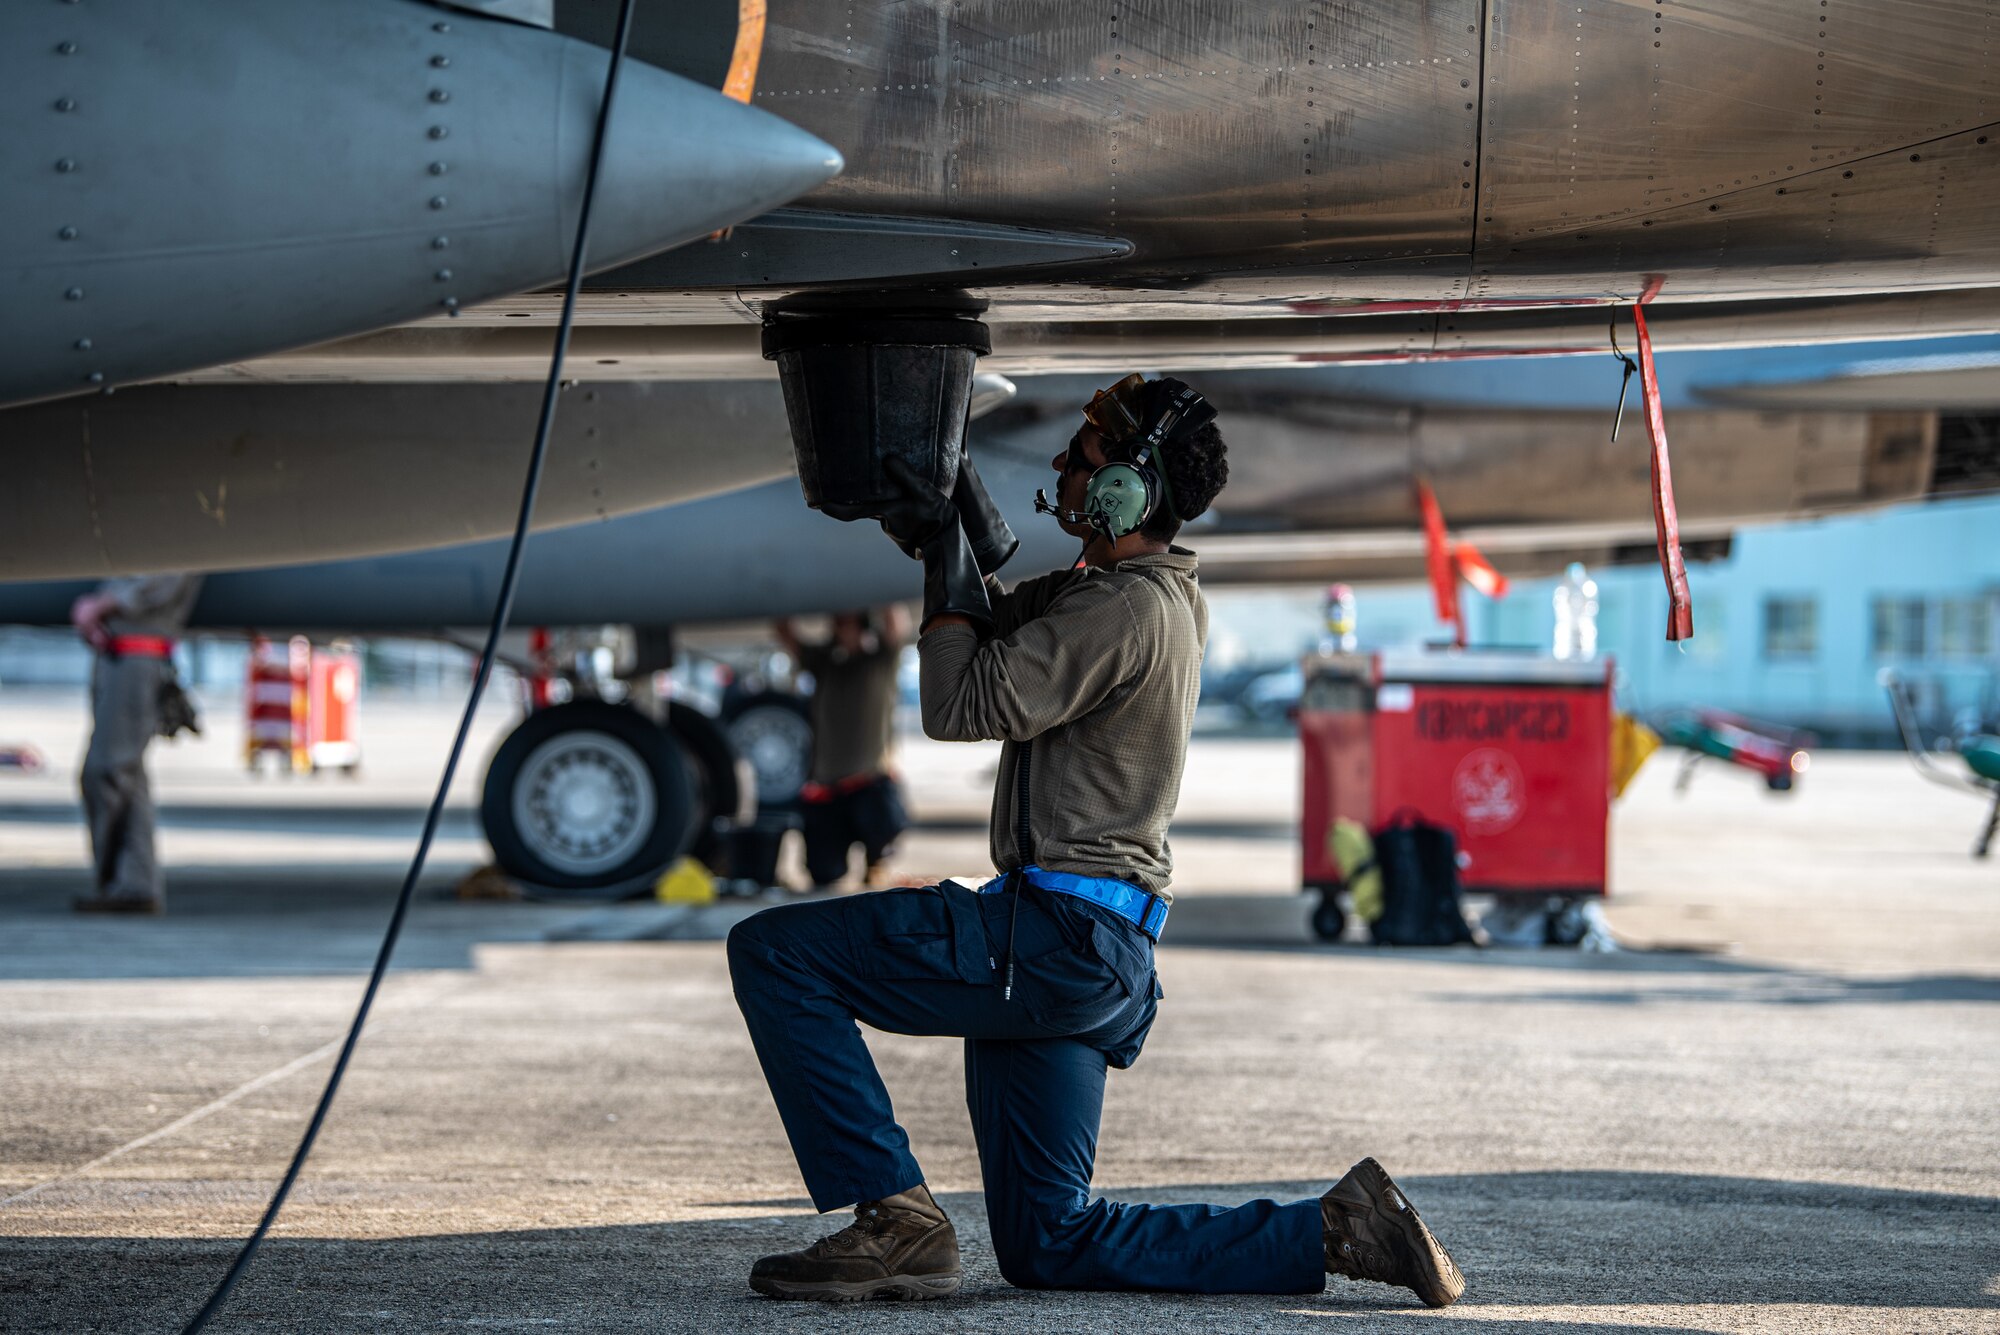 Maintainer checks jet after flight.